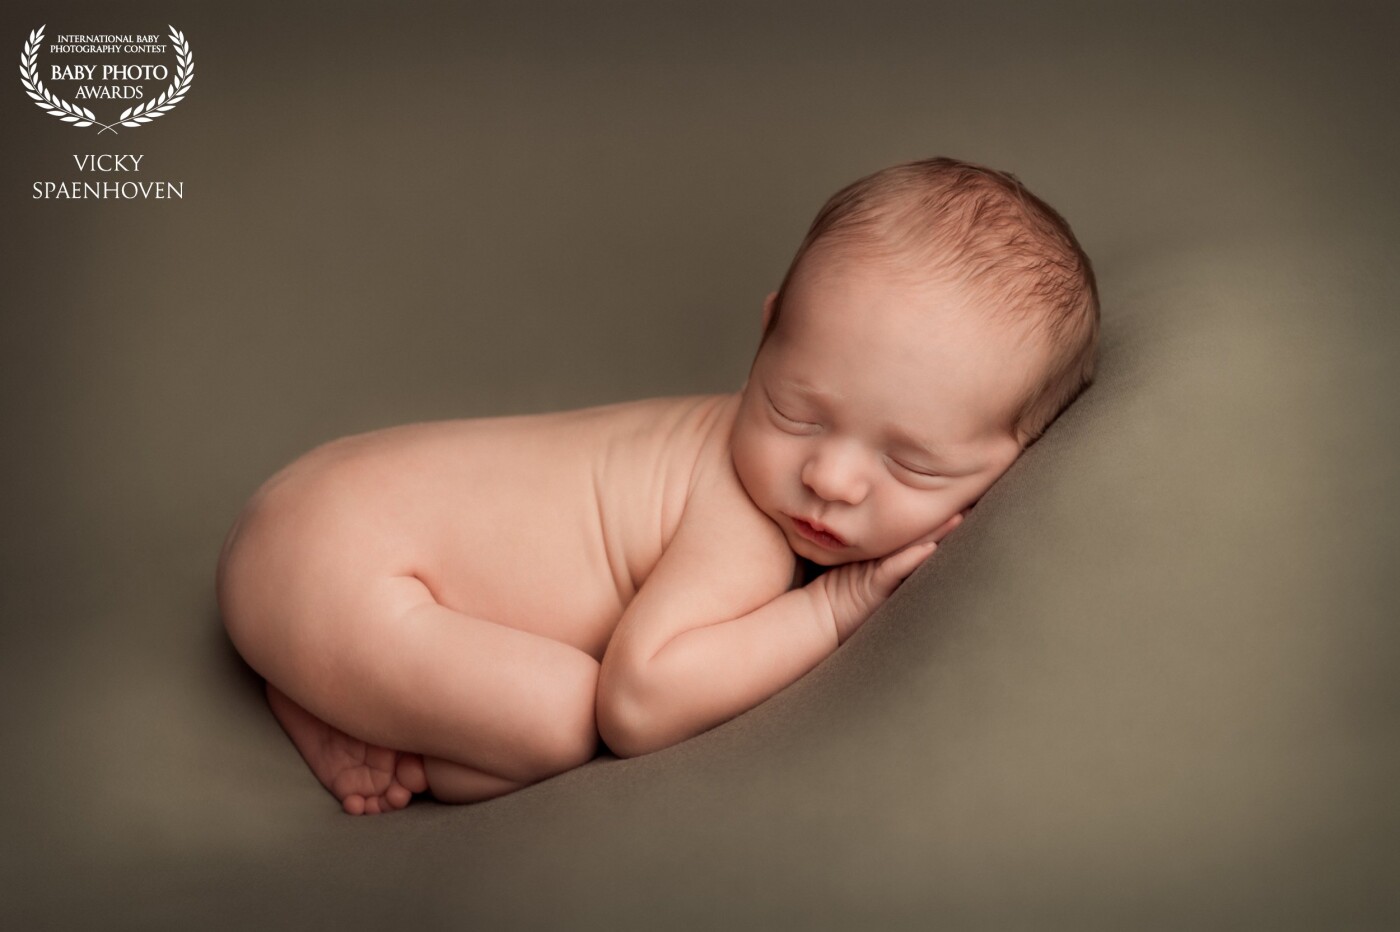 I'm really happy to receive an award for this pure image. I think these pictures are worth so much because they are so pure and timeless. It's all about the baby and there are no 'distractions'. I used a big soft box to create soft light.